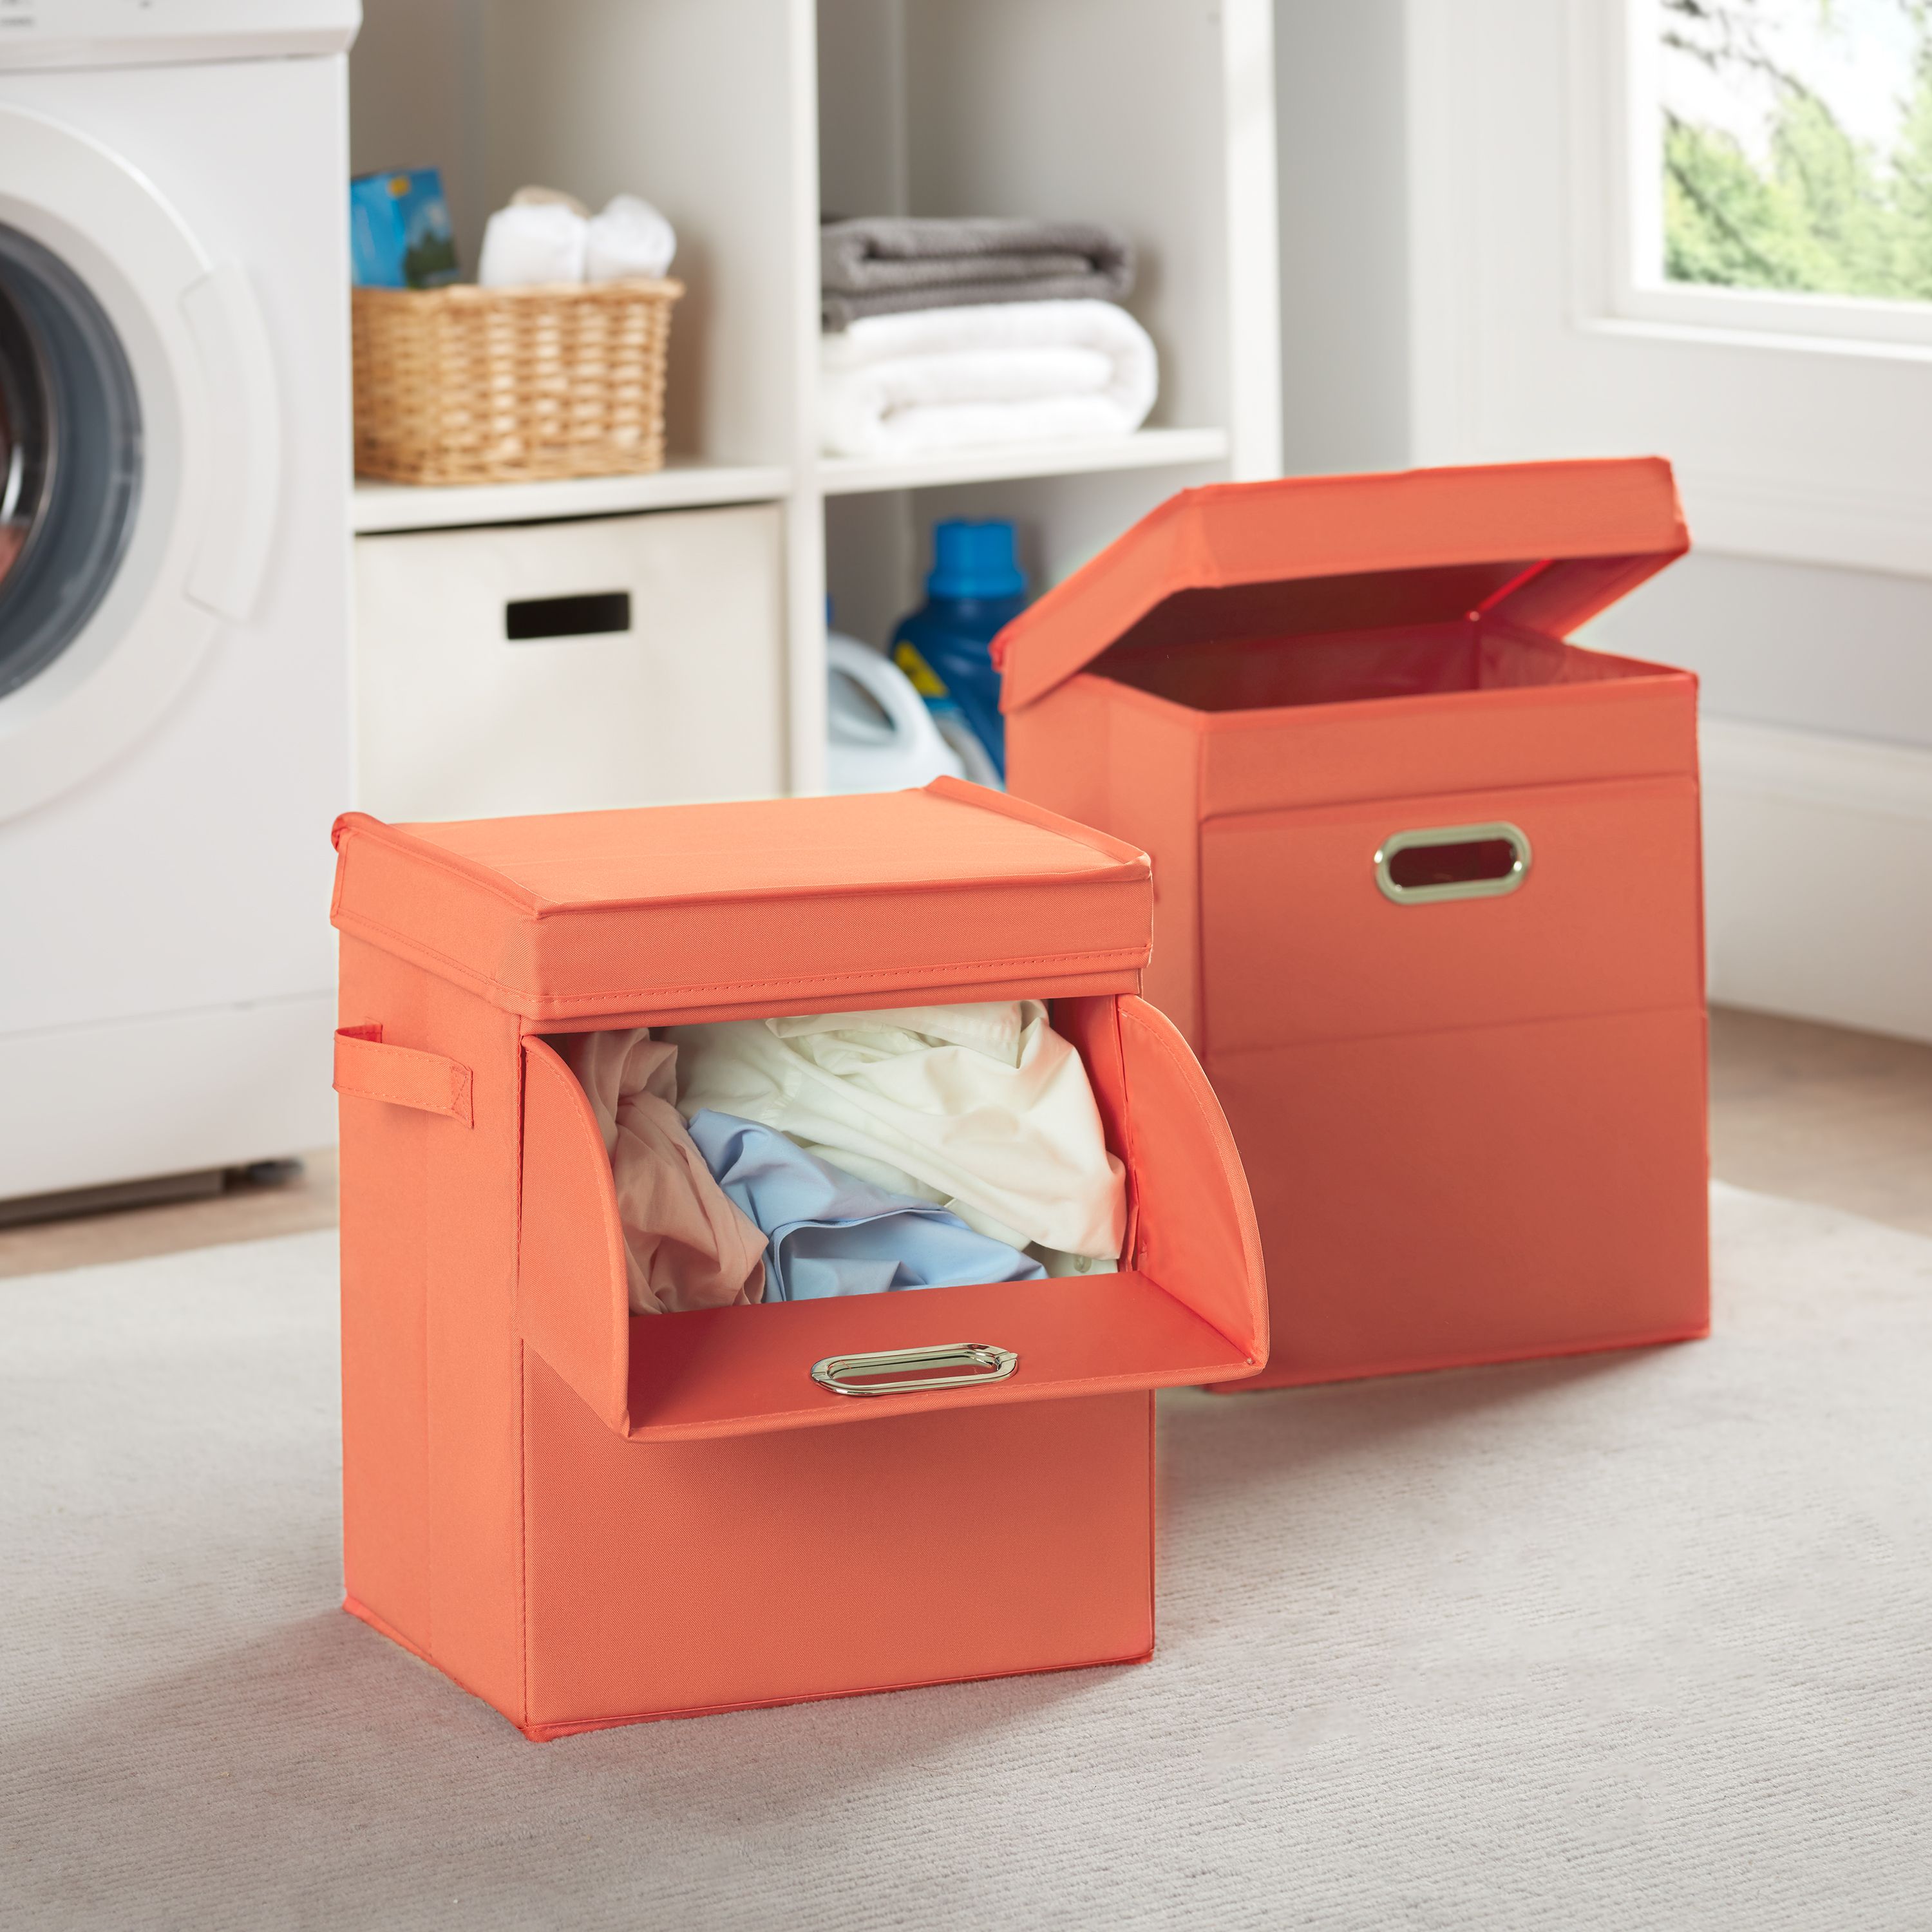 Mainstays Front Loading Stackable Laundry Hamper with Lid, Orange, 2 Pack - image 4 of 4